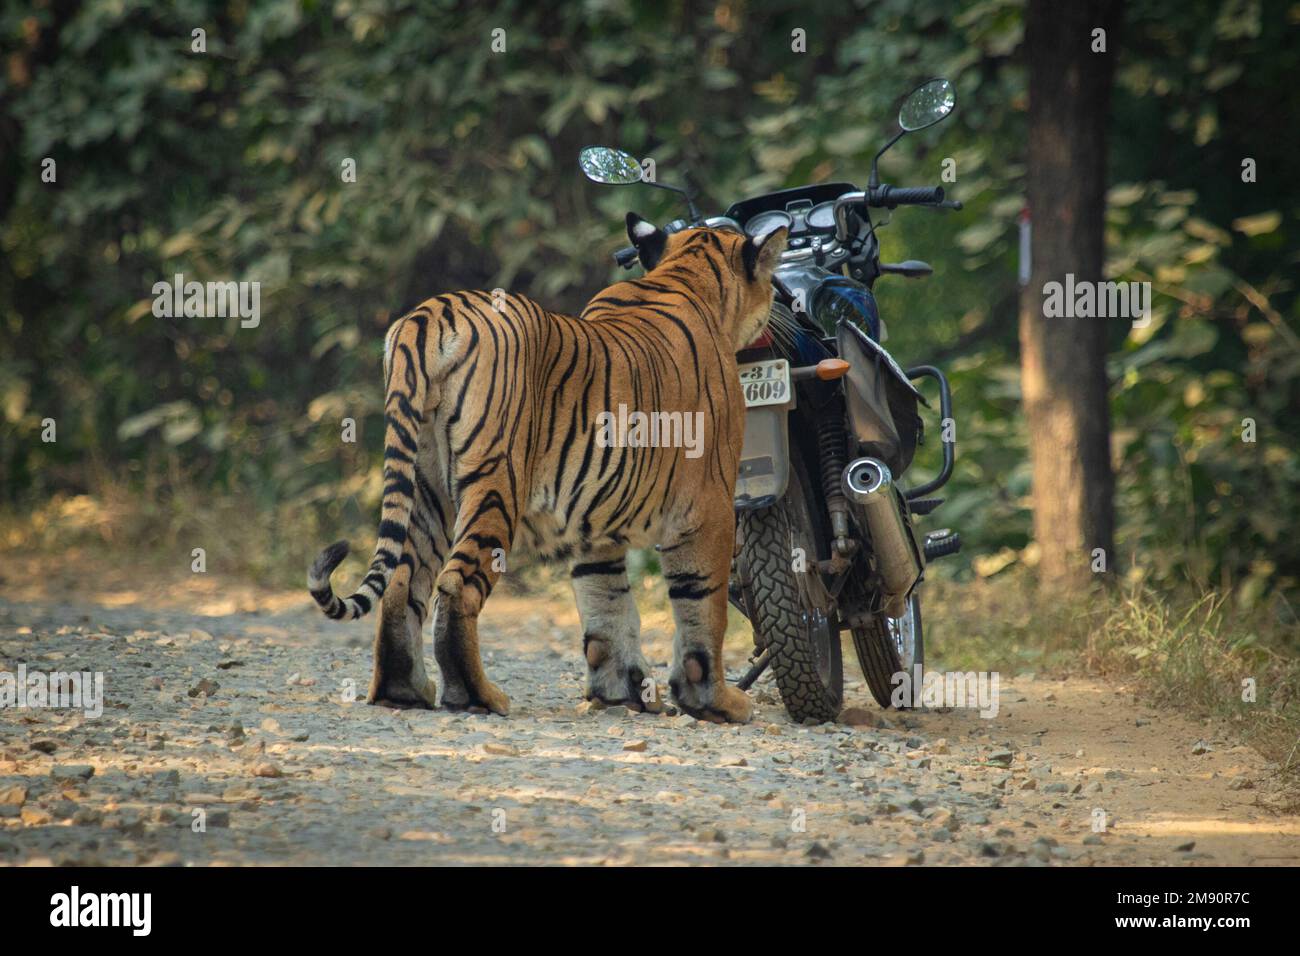 It smells strange. India: THESE INCREDIBLE images show how curious tigers can delay bikers from getting home while examining their motorbikes. One ima Stock Photo